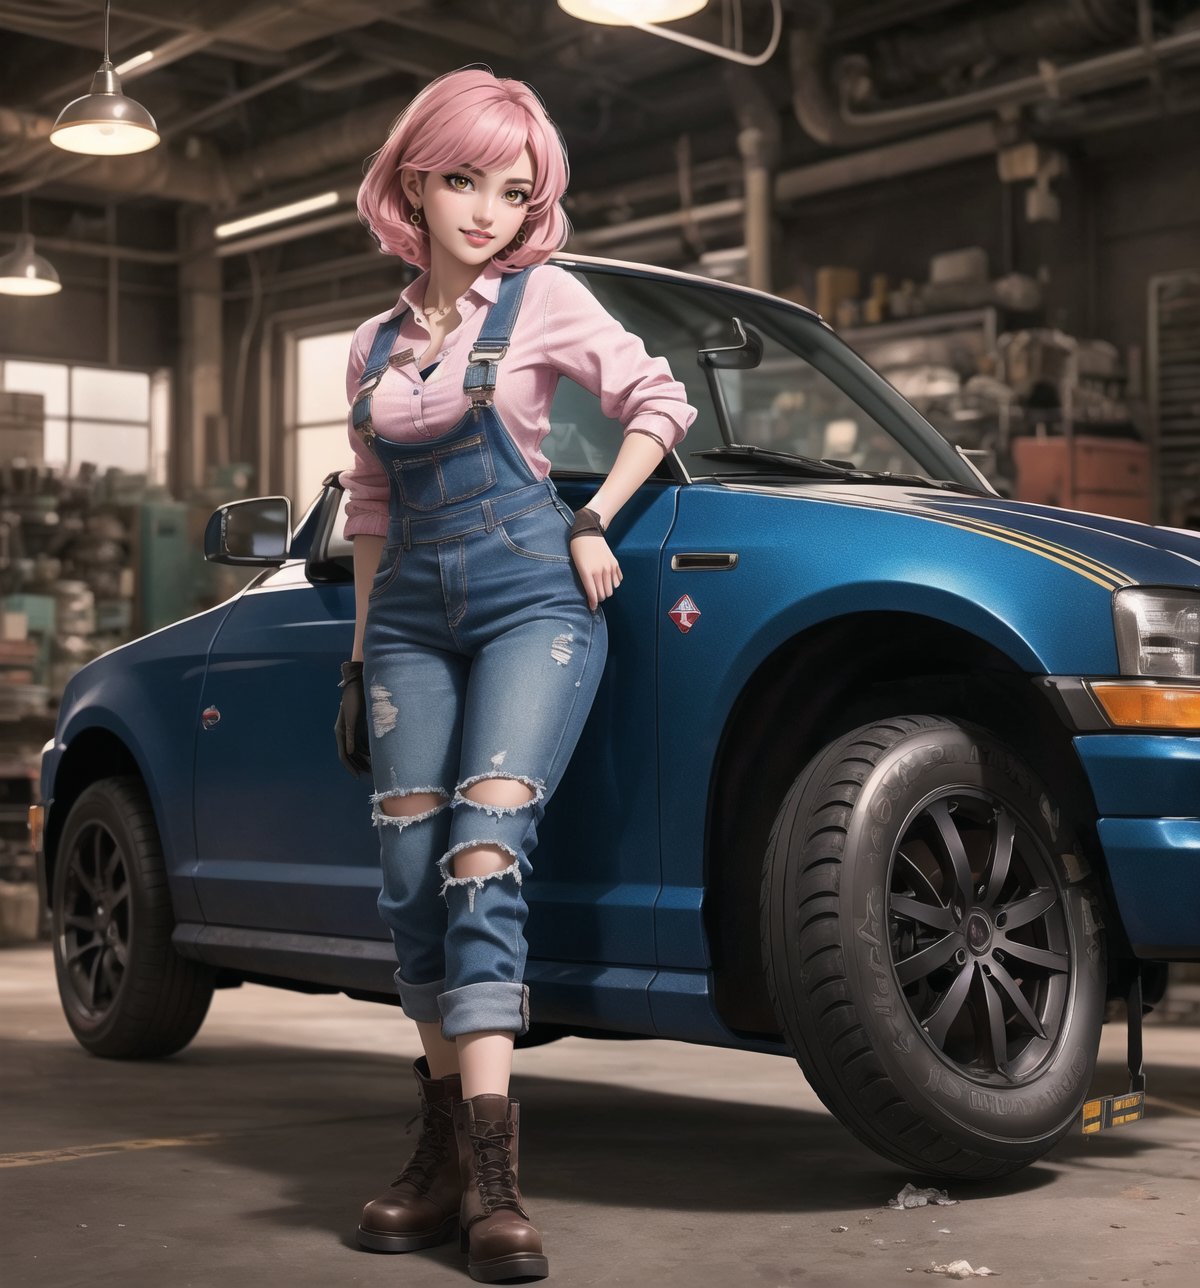 An ultra-detailed 16K masterpiece with a realistic, industrial style, rendered in ultra-high resolution with lifelike detail. | Rina, a 28-year-old woman, is dressed in dark blue mechanic's overalls, with the name "Rina" embroidered on the chest. She also wears ripped jeans, black leather boots, and brown leather gloves. Her short pink hair is tousled in a modern, shaggy cut. Her golden eyes are looking straight at the viewer as she smiles and shows her teeth, wearing bright red lipstick and war paint on her face. It is located in a vehicle repair shop, with machines, tires, metal structures and vehicle engines around it. The light from fluorescent lamps illuminates the place, creating an atmosphere of hard, concentrated work. | The image highlights Rina's sensual figure and the industrial elements of the auto repair shop. Machines, tires, metal structures and vehicle engines create a hard and concentrated work environment. Fluorescent lamps illuminate the scene, creating dramatic shadows and highlighting the details of the scene. | Soft, colorful lighting effects create a realistic, industrial atmosphere, while rough, detailed textures on the metal structures and costume add realism to the image. | A sensual and realistic scene of a woman in an auto repair shop, fusing elements of realistic and industrial art. | (((The image reveals a full-body shot as Rina assumes a sensual pose, engagingly leaning against a structure within the scene in an exciting manner. She takes on a sensual pose as she interacts, boldly leaning on a structure, leaning back and boldly throwing herself onto the structure, reclining back in an exhilarating way.))). | ((((full-body shot)))), ((perfect pose)), ((perfect limbs, perfect fingers, better hands, perfect hands, hands))++, ((perfect legs, perfect feet))++, ((huge breasts)), ((perfect design)), ((perfect composition)), ((very detailed scene, very detailed background, perfect layout, correct imperfections)), Enhance++, Ultra details++, More Detail++